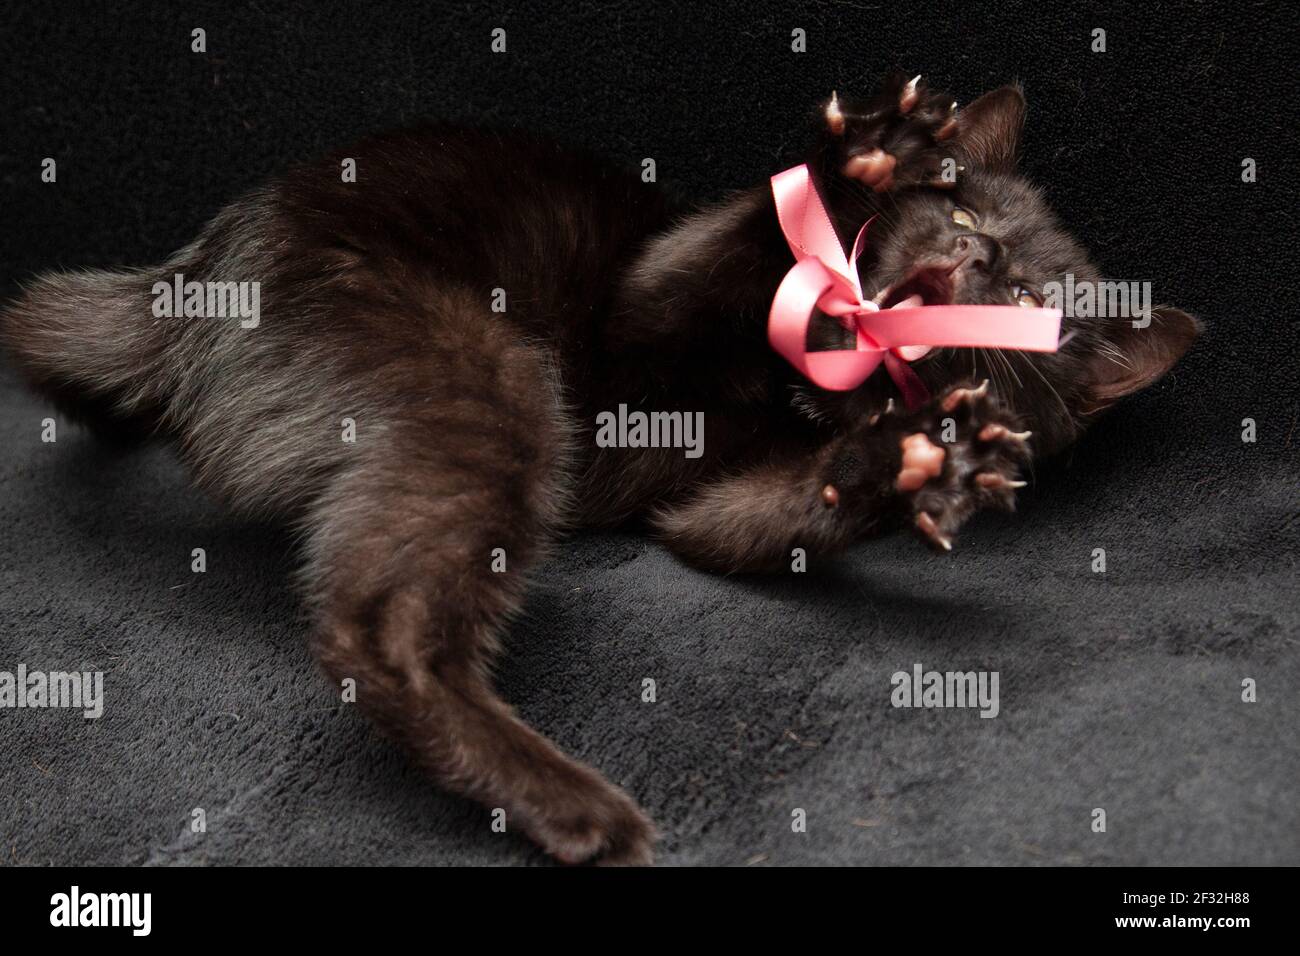 a fierce scary black kitten yowling and showing its sharp little claws Stock Photo